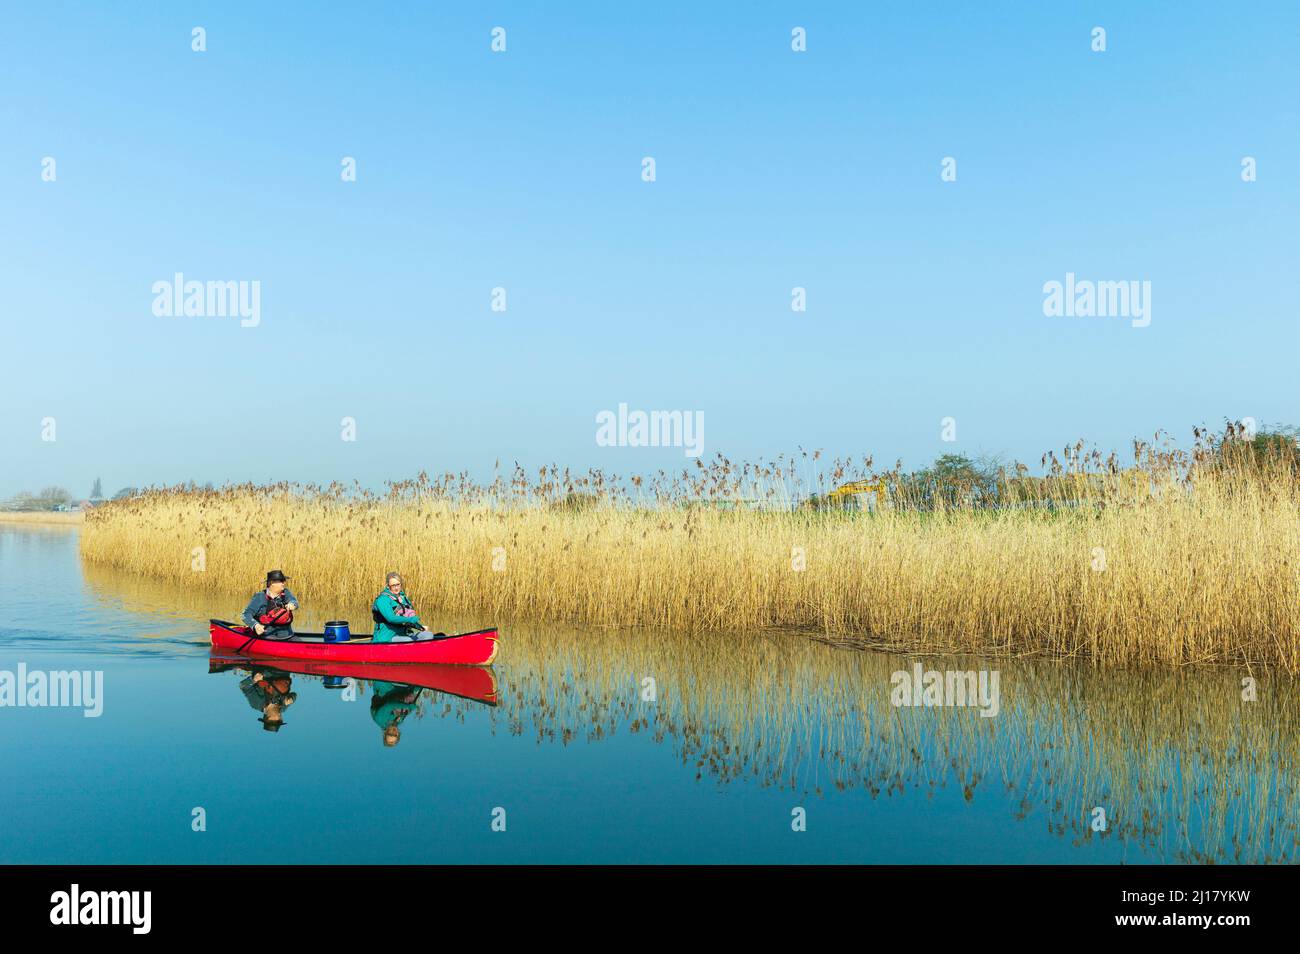 Man and woman row down the river Hull in a small boat flanked by golden reeds under bright blue sky in spring in Beverley, UK. Stock Photo